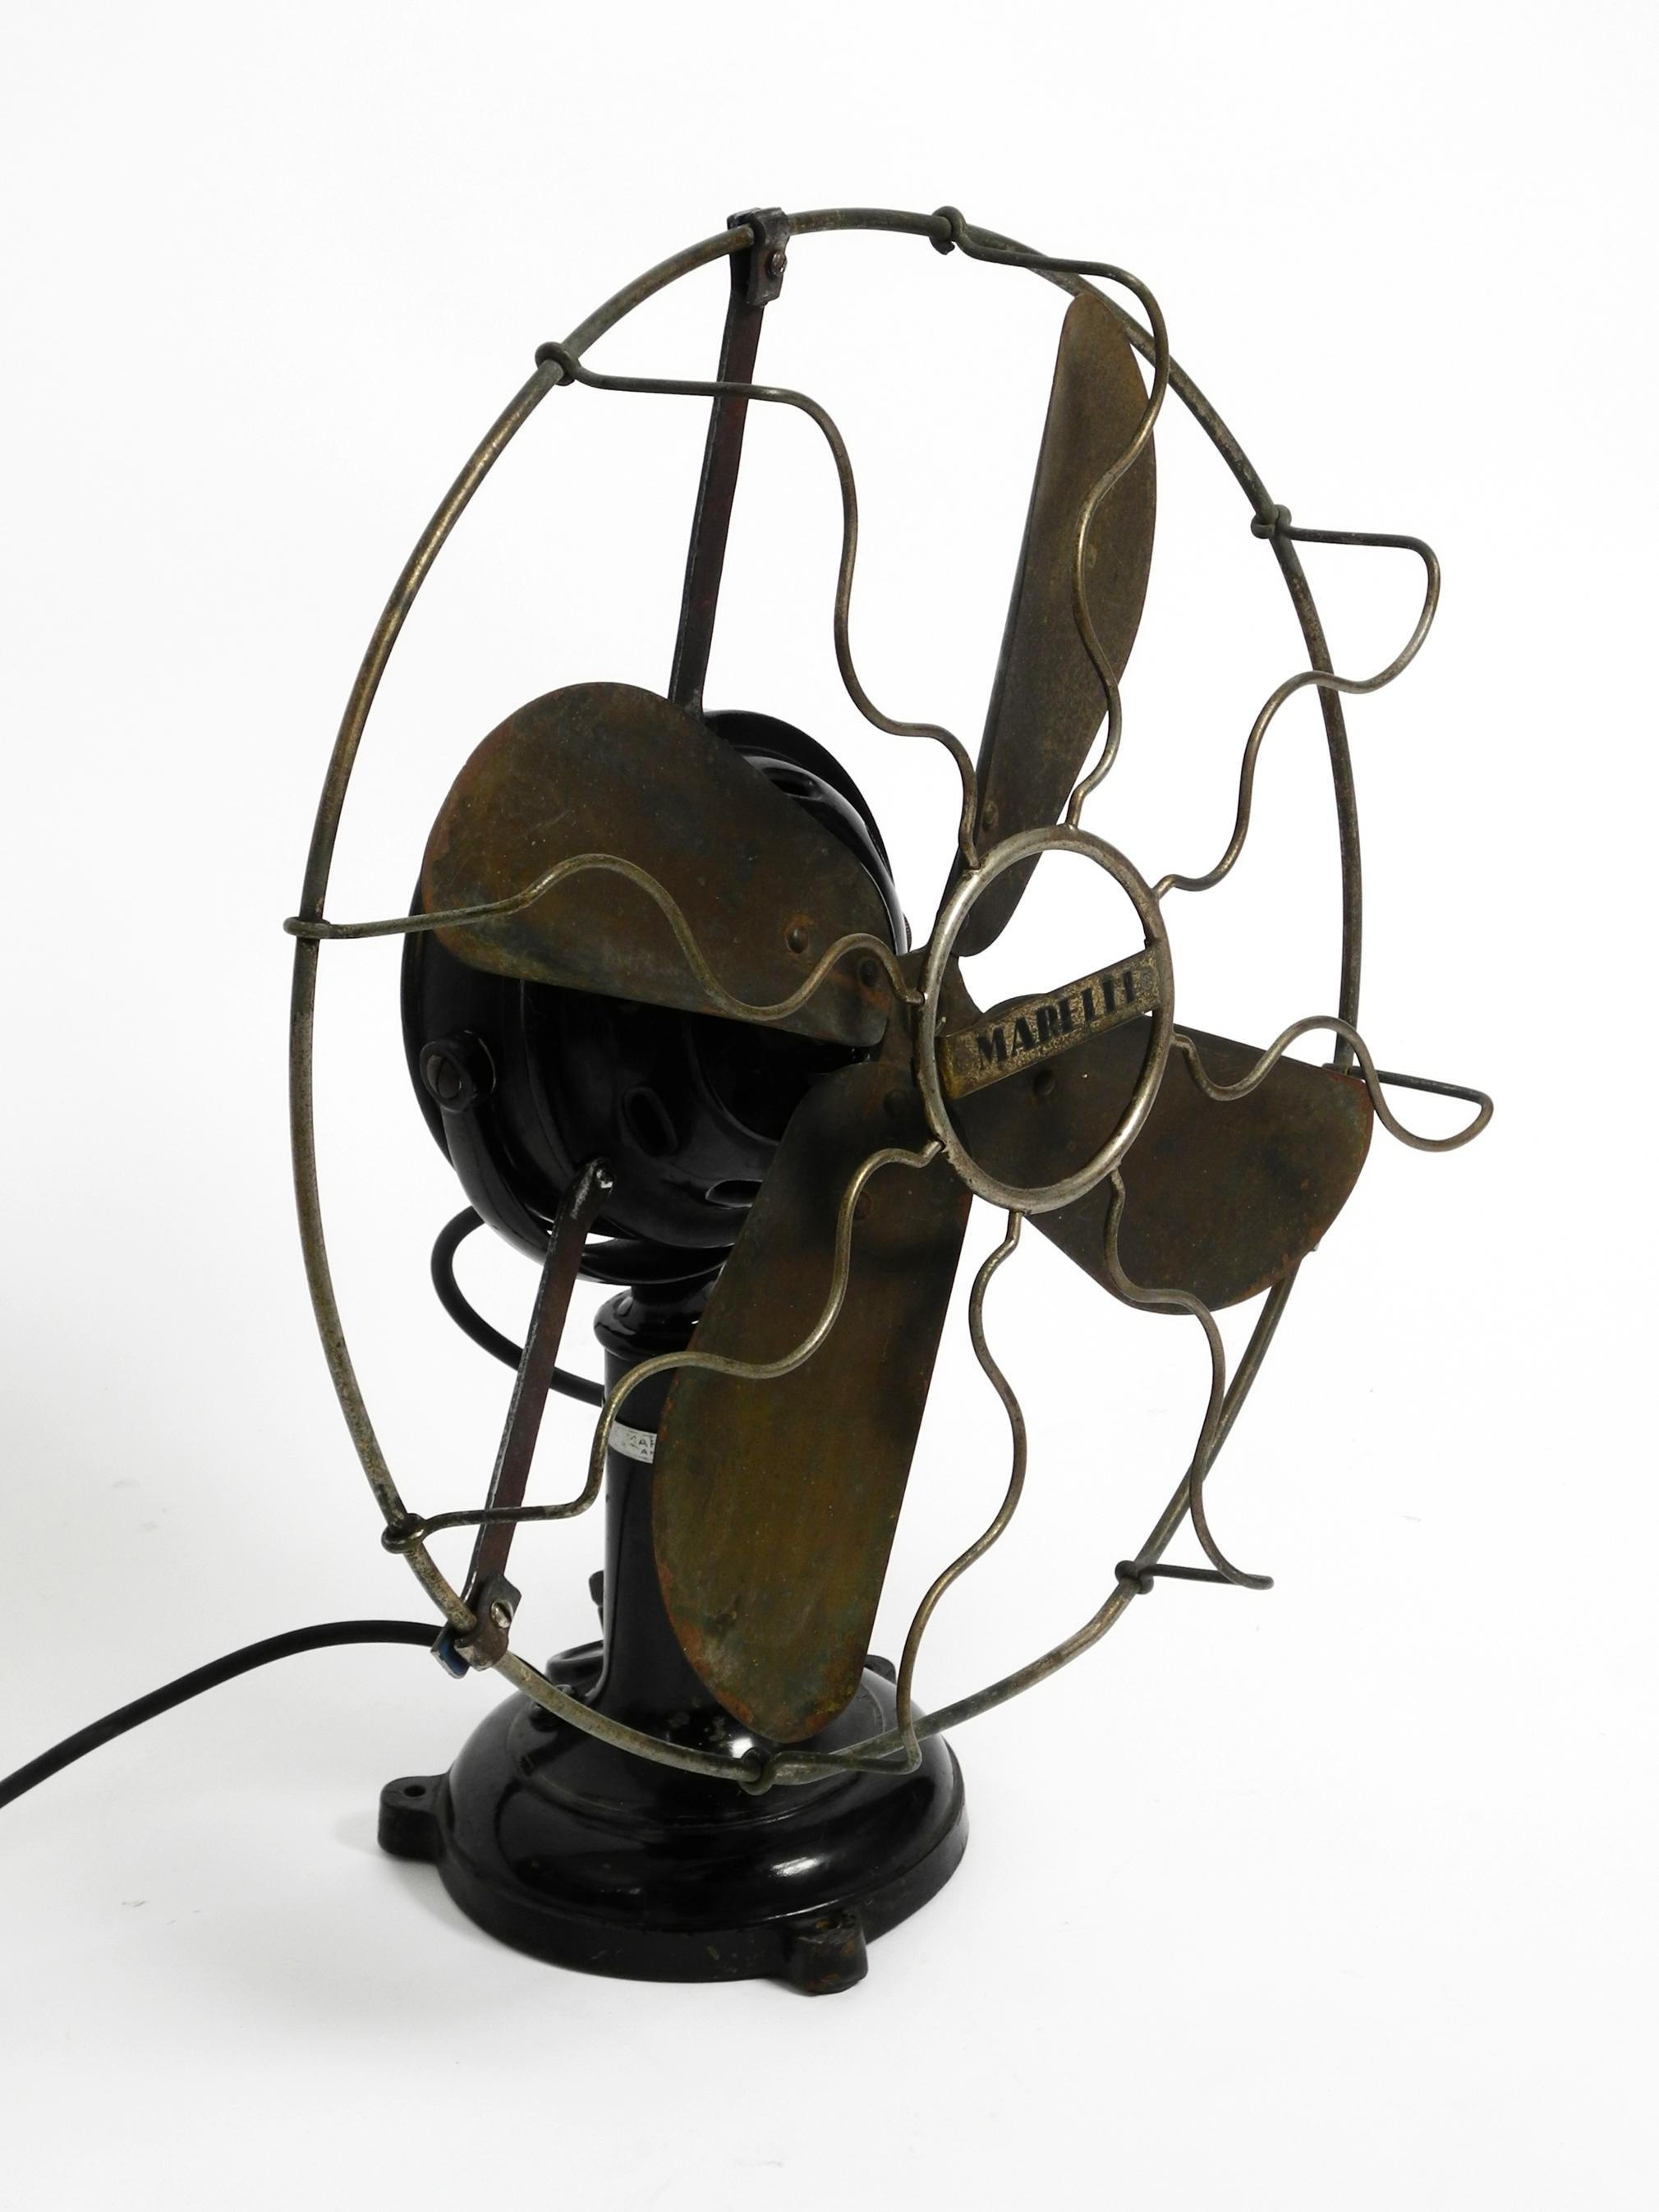 Huge Heavy Original 1930s Industrial Metal Table Fan by Marelli Made in Italy 12